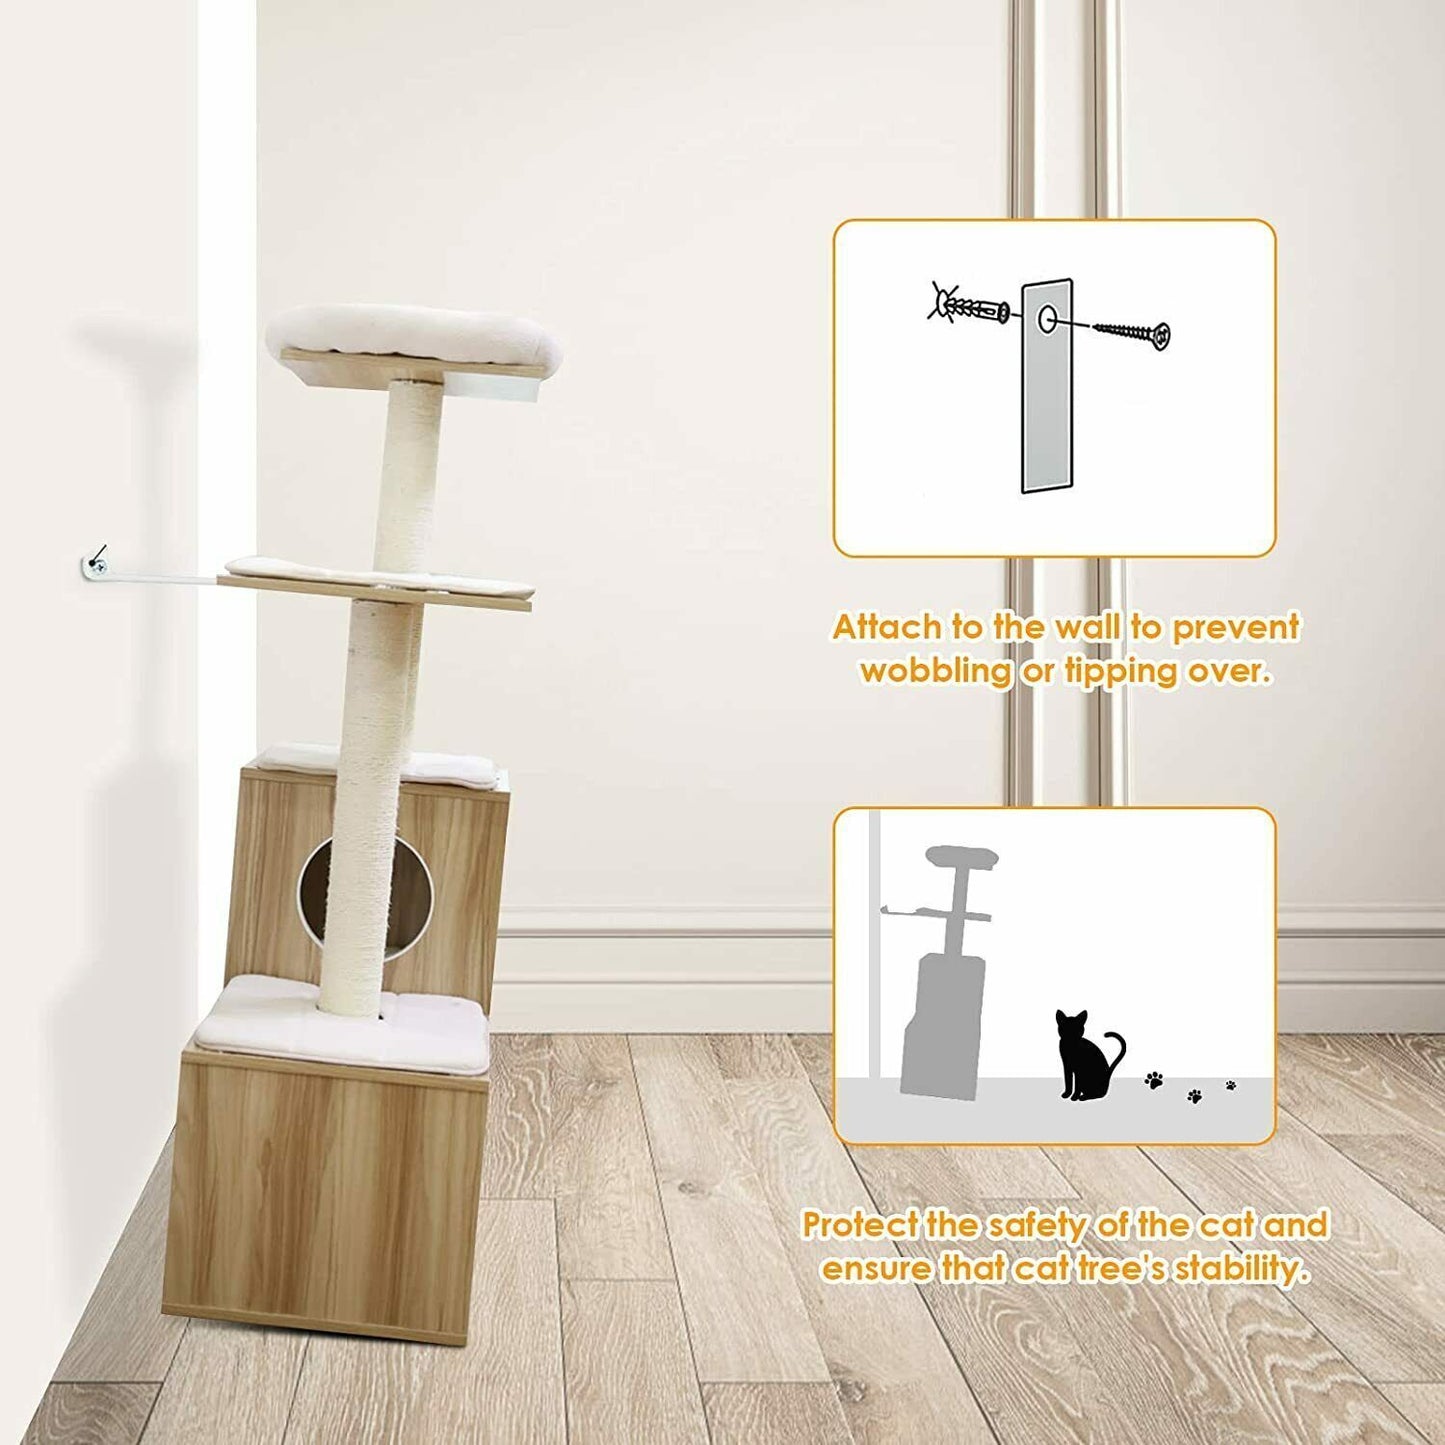 Arlopu Modern Wooden Cat Tree Tower, Large Cat Condo Furniture with Multi-Layer Platform, 55.6" Tall Cat Climbing Stand House with Sisal Scratching Post, Washable Plush Cushion for Kittens / Large Cats